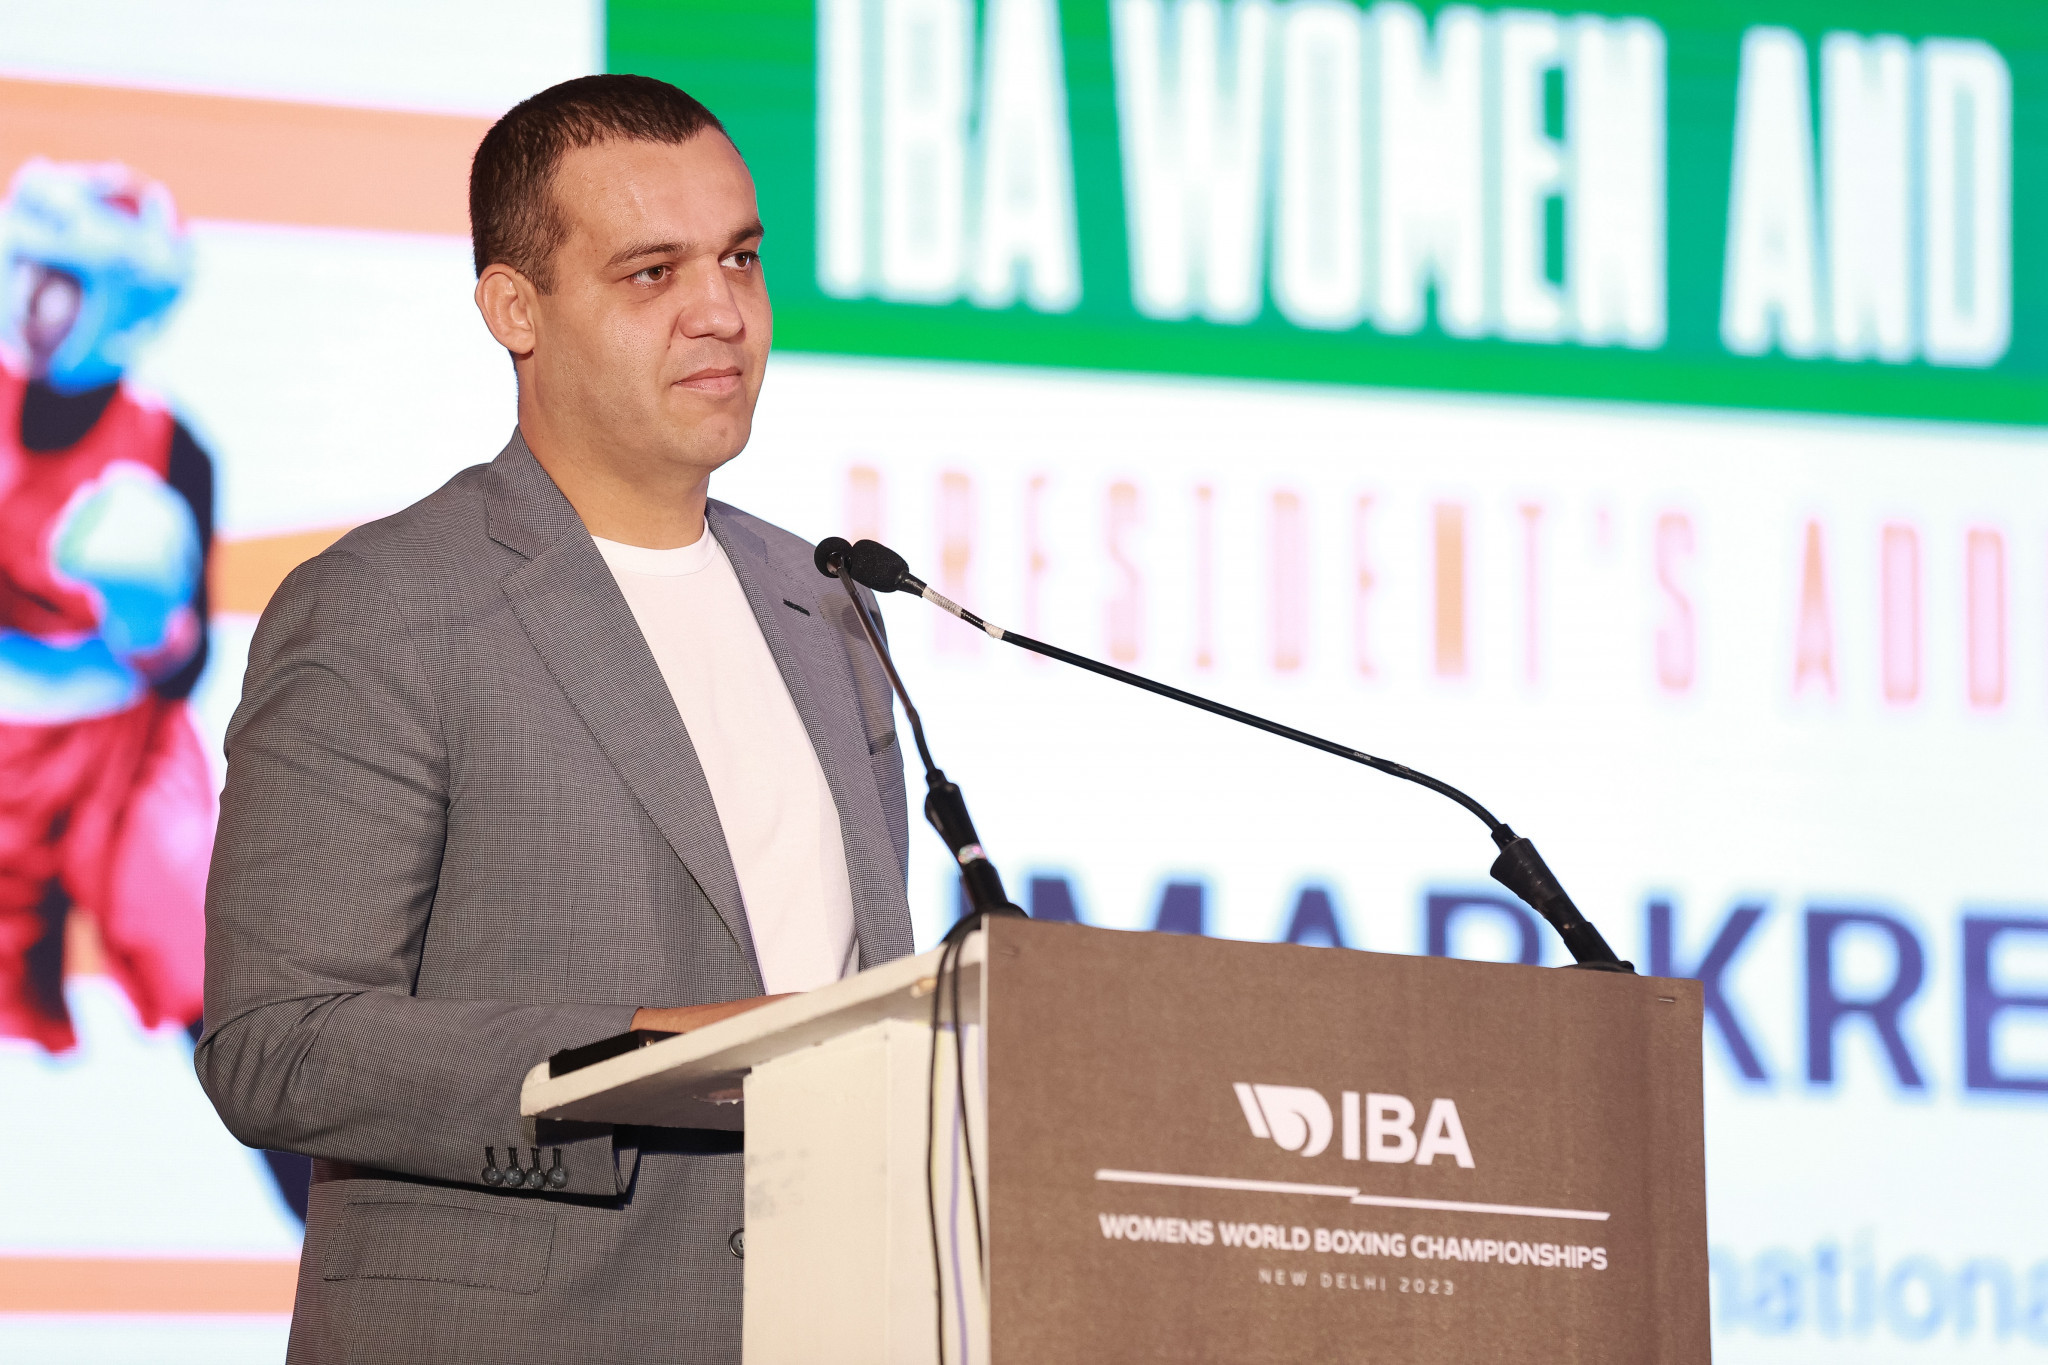 IBA claims expulsion "catastrophic" for boxing and references "fascist Germany" in statement